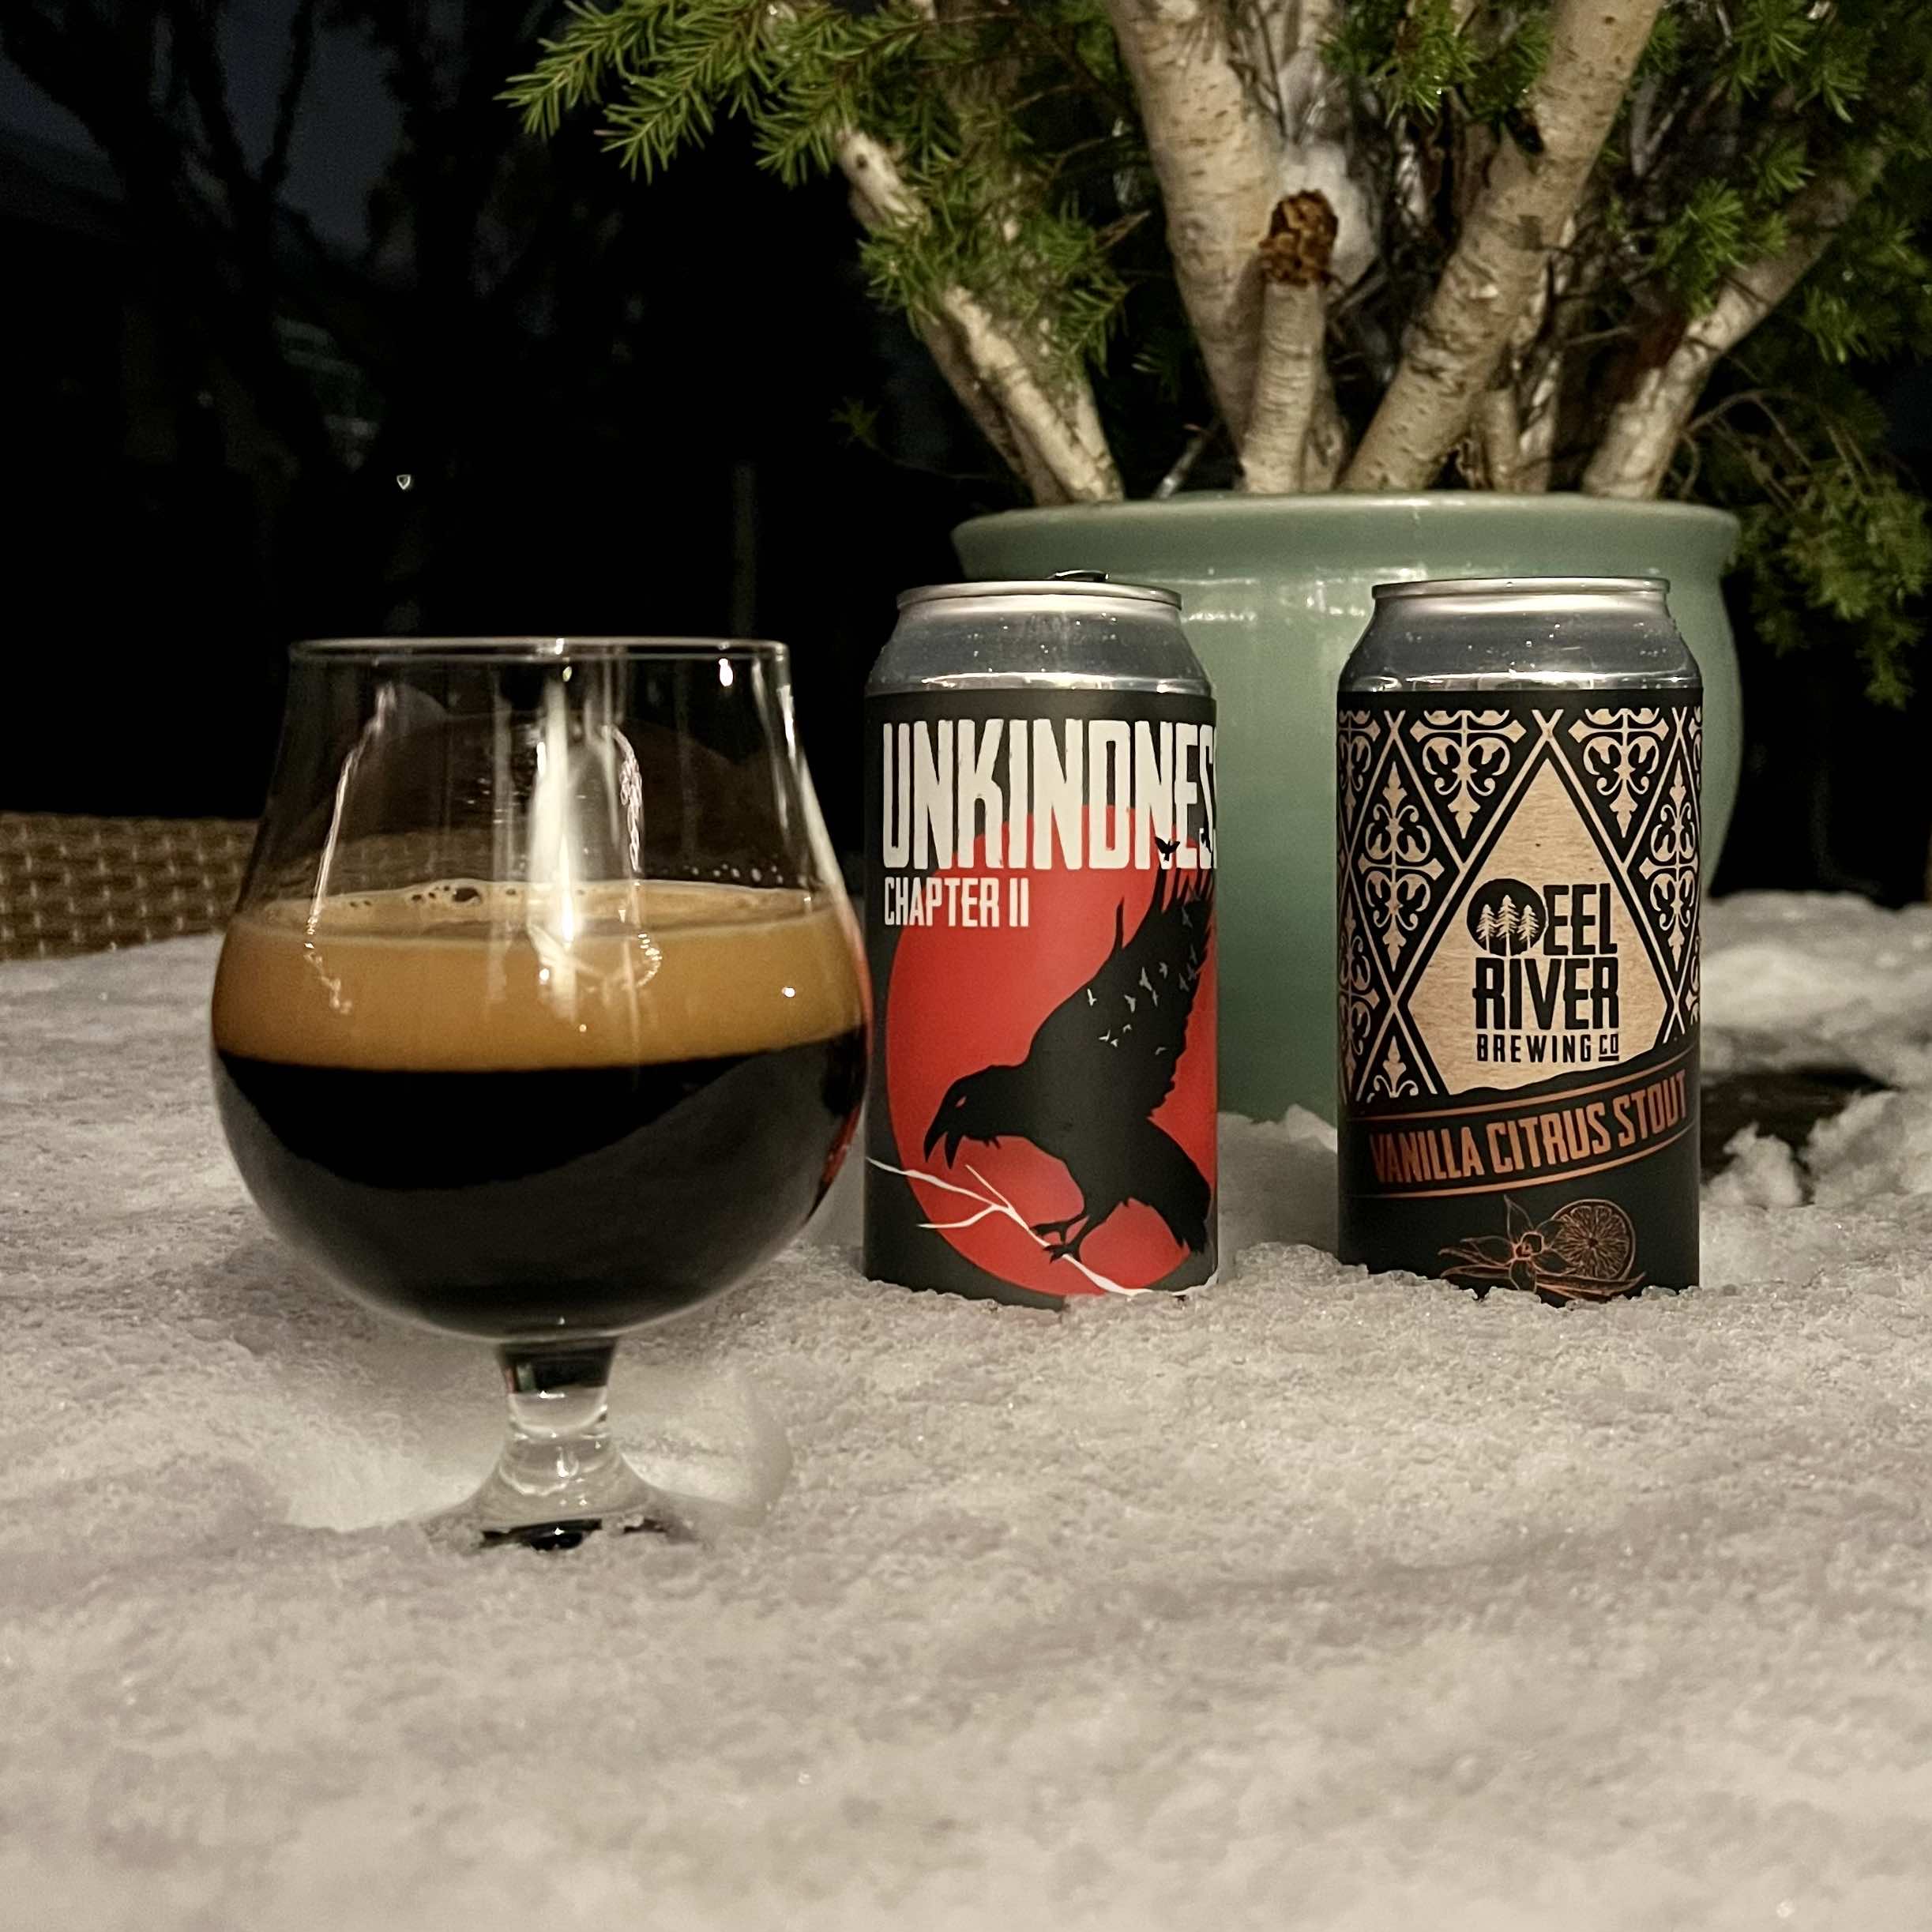 Eel River Brewing releases UNKINDNESS Barrel-Aged Stout and Vanilla Citrus Stout